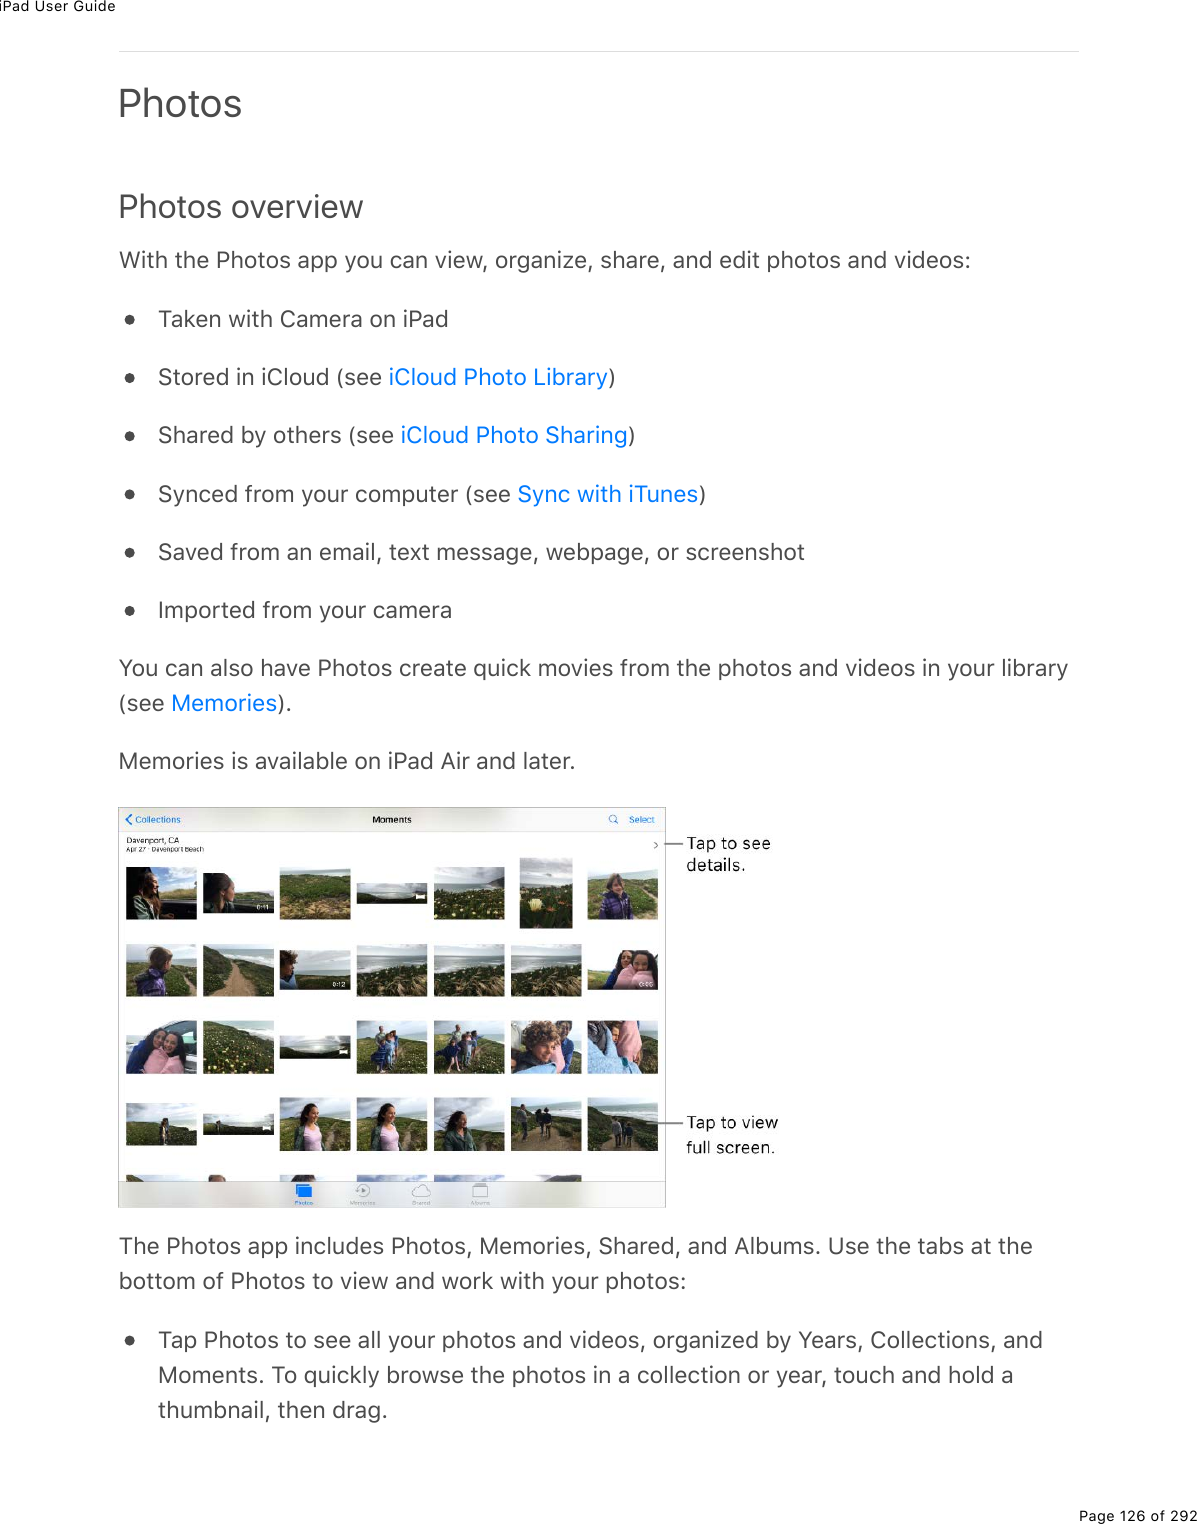 iPad User GuidePage 126 of 292PhotosPhotos overview&lt;.&quot;*%&quot;*(%@*2&quot;2&amp;%#--%=2&gt;%)#0%D.(1L%2$;#0.K(L%&amp;*#$(L%#07%(7.&quot;%-*2&quot;2&amp;%#07%D.7(2&amp;OM#&apos;(0%1.&quot;*%4#/($#%20%.@#7!&quot;2$(7%.0%.432&gt;7%W&amp;((% X!*#$(7%5=%2&quot;*($&amp;%W&amp;((% X!=0)(7%9$2/%=2&gt;$%)2/-&gt;&quot;($%W&amp;((% X!#D(7%9$2/%#0%(/#.3L%&quot;(,&quot;%/(&amp;&amp;#;(L%1(5-#;(L%2$%&amp;)$((0&amp;*2&quot;S/-2$&quot;(7%9$2/%=2&gt;$%)#/($#Y2&gt;%)#0%#3&amp;2%*#D(%@*2&quot;2&amp;%)$(#&quot;(%]&gt;.)&apos;%/2D.(&amp;%9$2/%&quot;*(%-*2&quot;2&amp;%#07%D.7(2&amp;%.0%=2&gt;$%3.5$#$=W&amp;((% XE8(/2$.(&amp;%.&amp;%#D#.3#53(%20%.@#7%?.$%#07%3#&quot;($EM*(%@*2&quot;2&amp;%#--%.0)3&gt;7(&amp;%@*2&quot;2&amp;L%8(/2$.(&amp;L%!*#$(7L%#07%?35&gt;/&amp;E%Z&amp;(%&quot;*(%&quot;#5&amp;%#&quot;%&quot;*(52&quot;&quot;2/%29%@*2&quot;2&amp;%&quot;2%D.(1%#07%12$&apos;%1.&quot;*%=2&gt;$%-*2&quot;2&amp;OM#-%@*2&quot;2&amp;%&quot;2%&amp;((%#33%=2&gt;$%-*2&quot;2&amp;%#07%D.7(2&amp;L%2$;#0.K(7%5=%Y(#$&amp;L%4233()&quot;.20&amp;L%#0782/(0&quot;&amp;E%M2%]&gt;.)&apos;3=%5$21&amp;(%&quot;*(%-*2&quot;2&amp;%.0%#%)233()&quot;.20%2$%=(#$L%&quot;2&gt;)*%#07%*237%#&quot;*&gt;/50#.3L%&quot;*(0%7$#;E.432&gt;7%@*2&quot;2%V.5$#$=.432&gt;7%@*2&quot;2%!*#$.0;!=0)%1.&quot;*%.M&gt;0(&amp;8(/2$.(&amp;